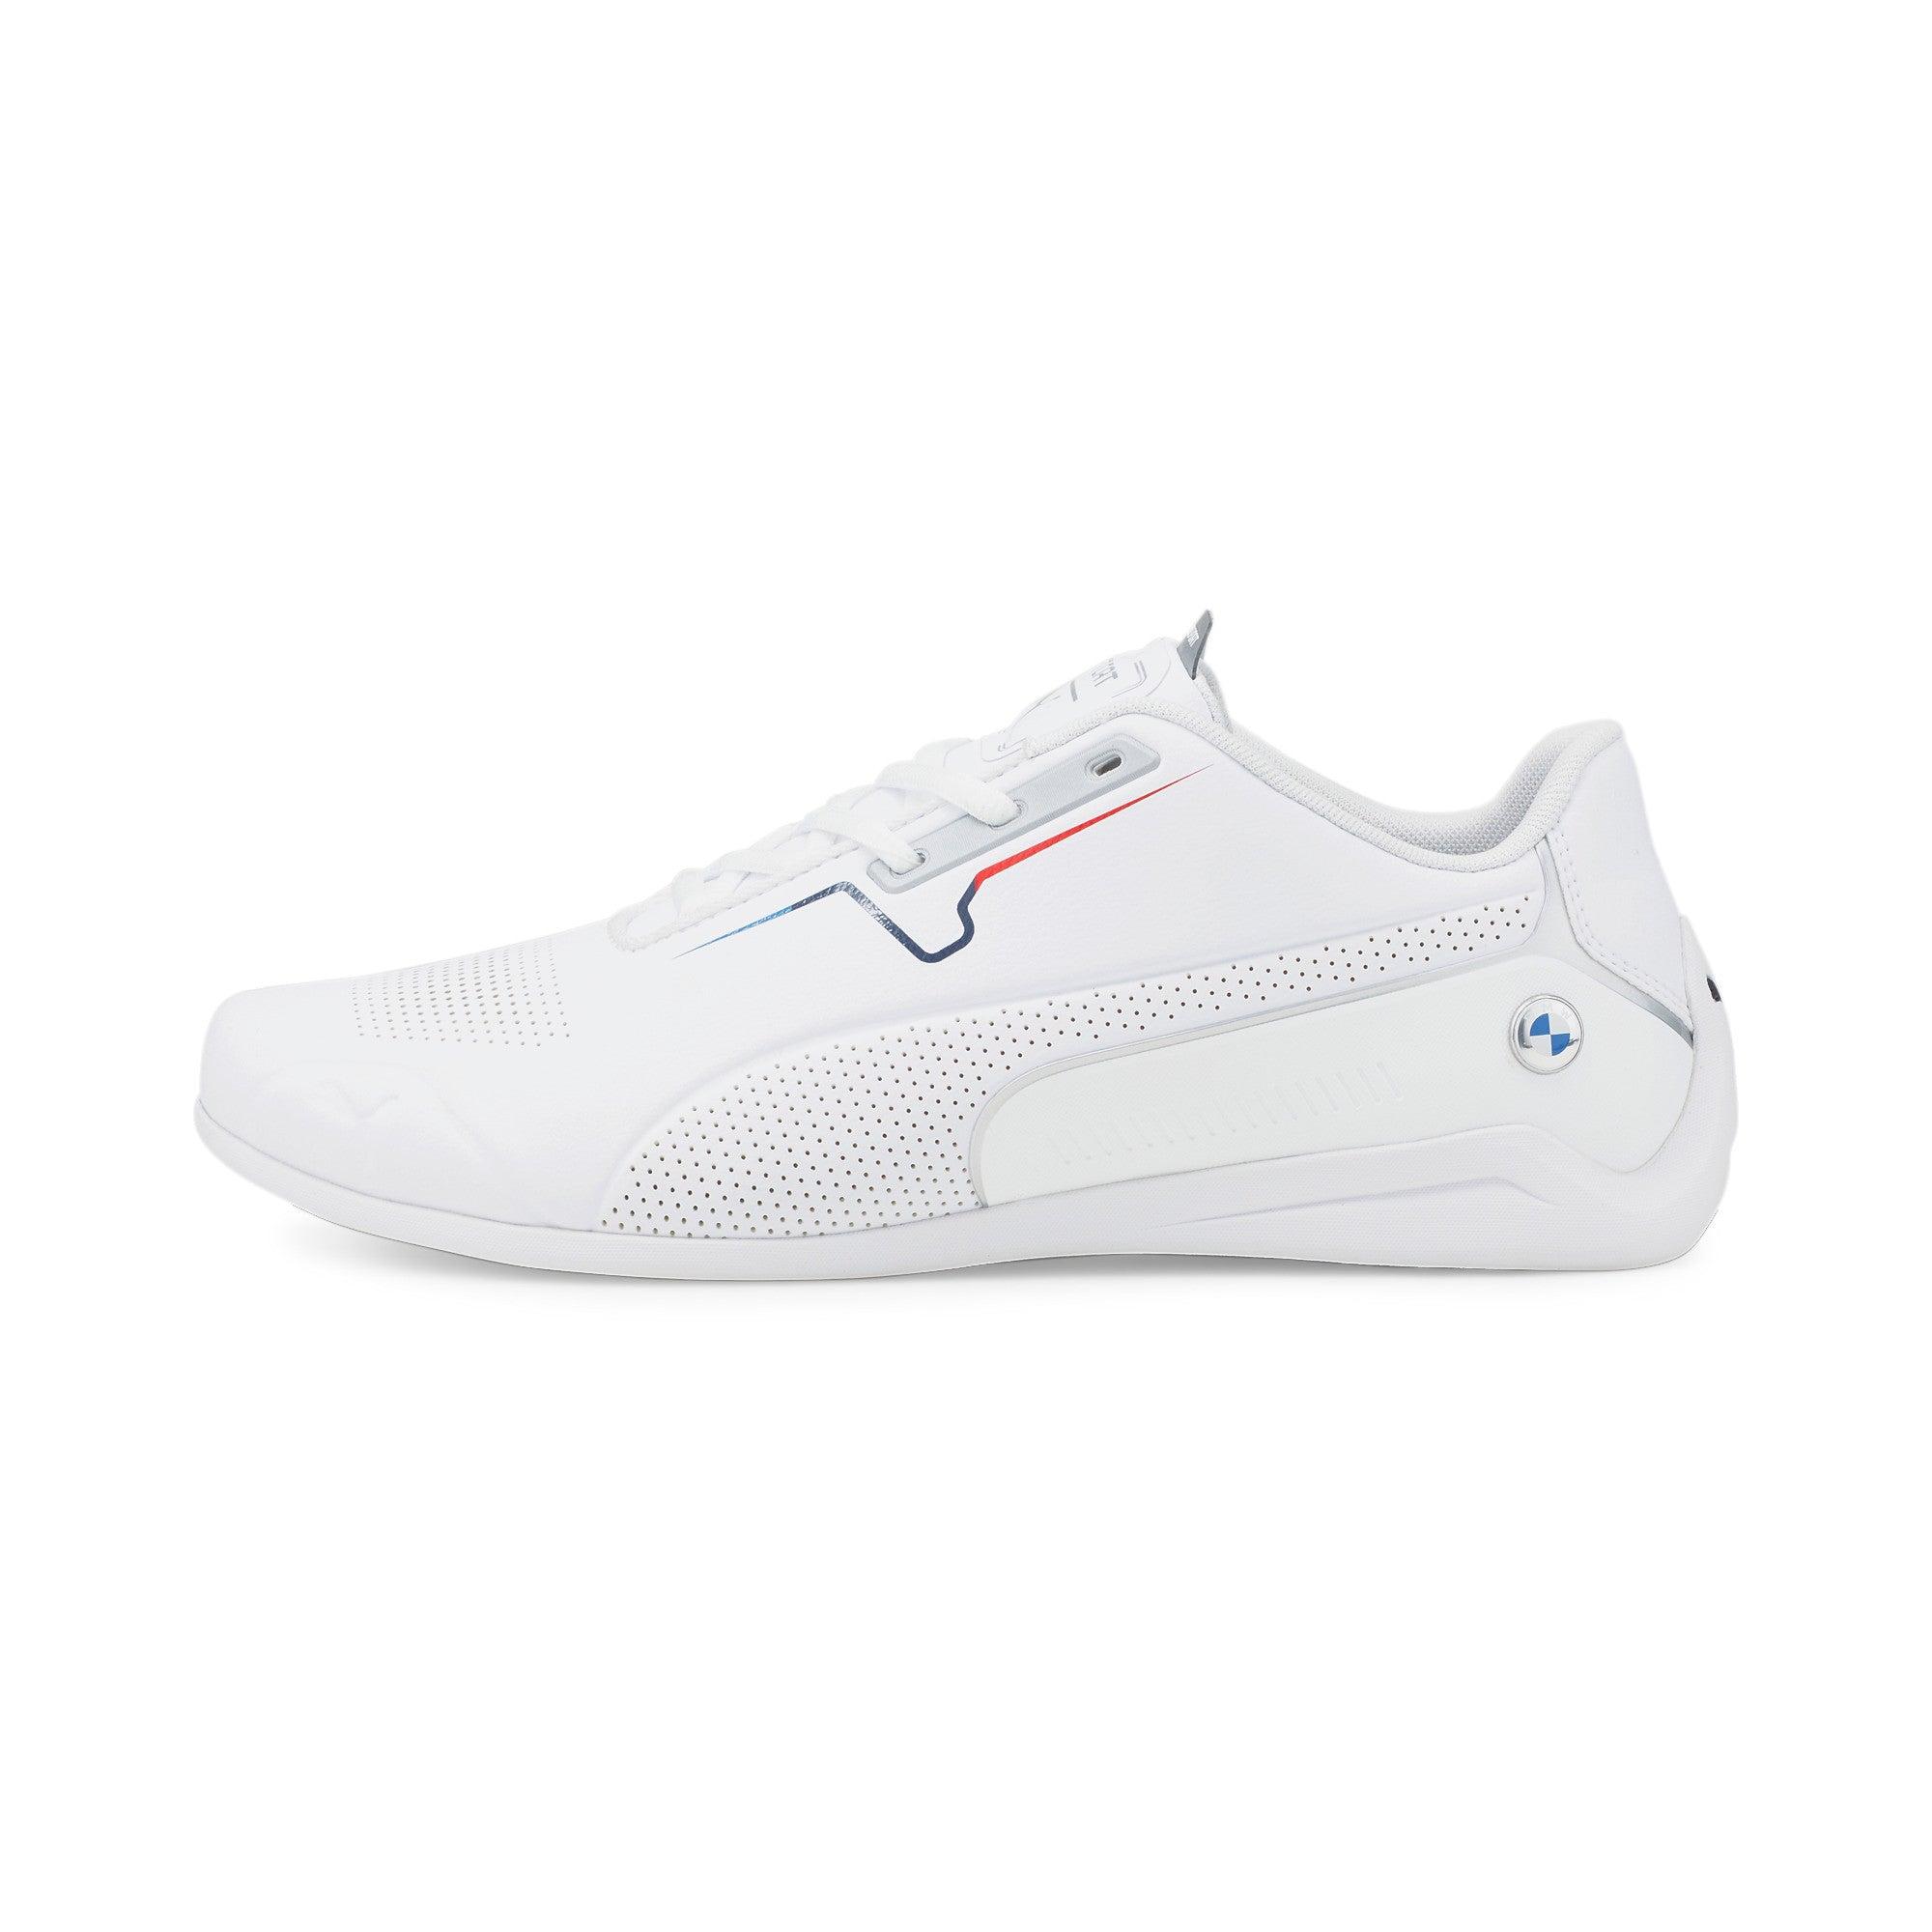 PUMA Synthetic Bmw M Motorsport Drift Cat 8 Sneaker in White/White (White)  for Men - Save 56% | Lyst